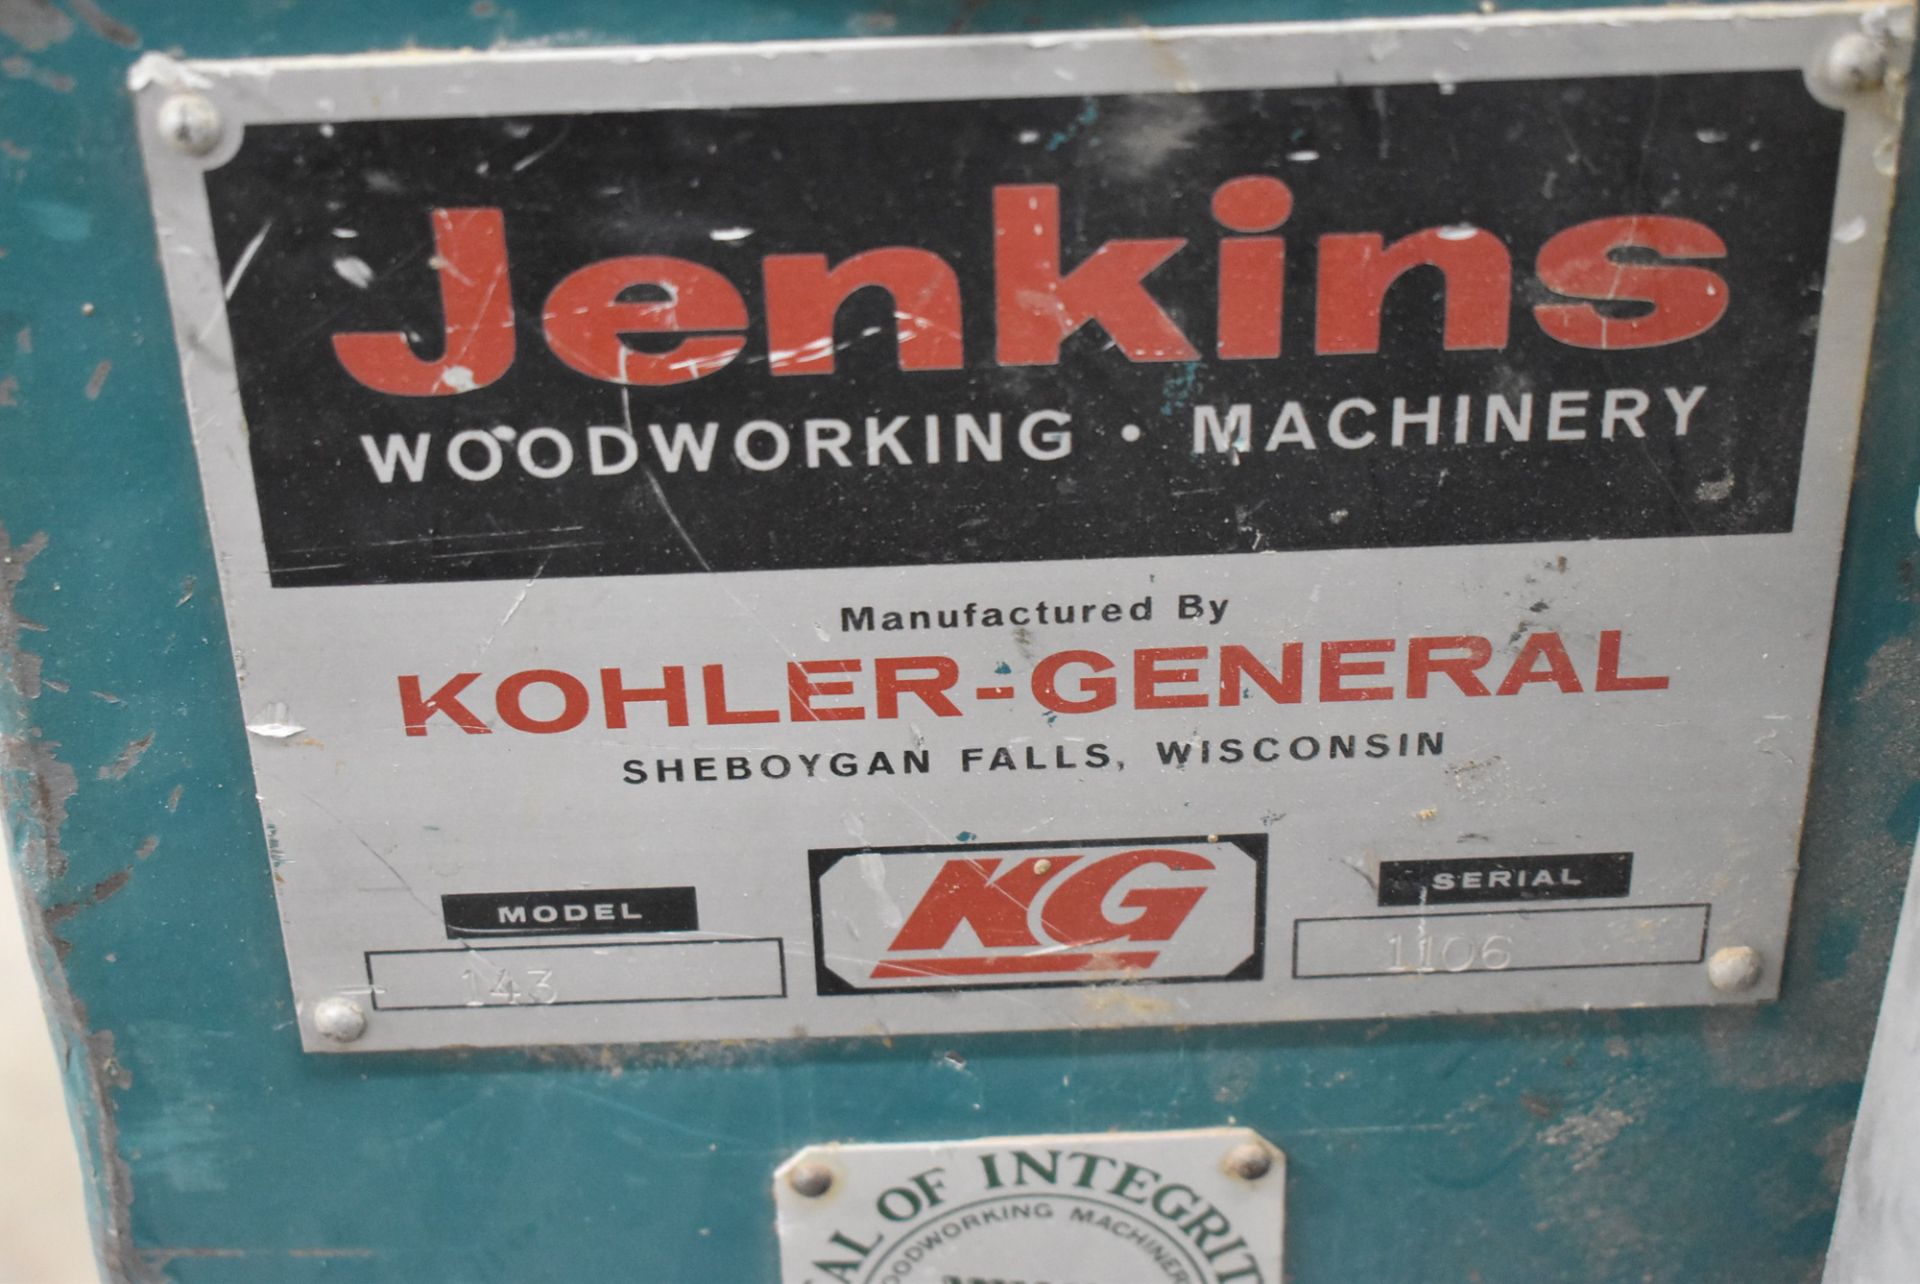 JENKINS MODEL 143 DOUBLE END TENONER SAW WITH 96" TRAVERSE, 48" INFEED BEAM LENGTH, SPEEDS TO 75 - Image 5 of 5